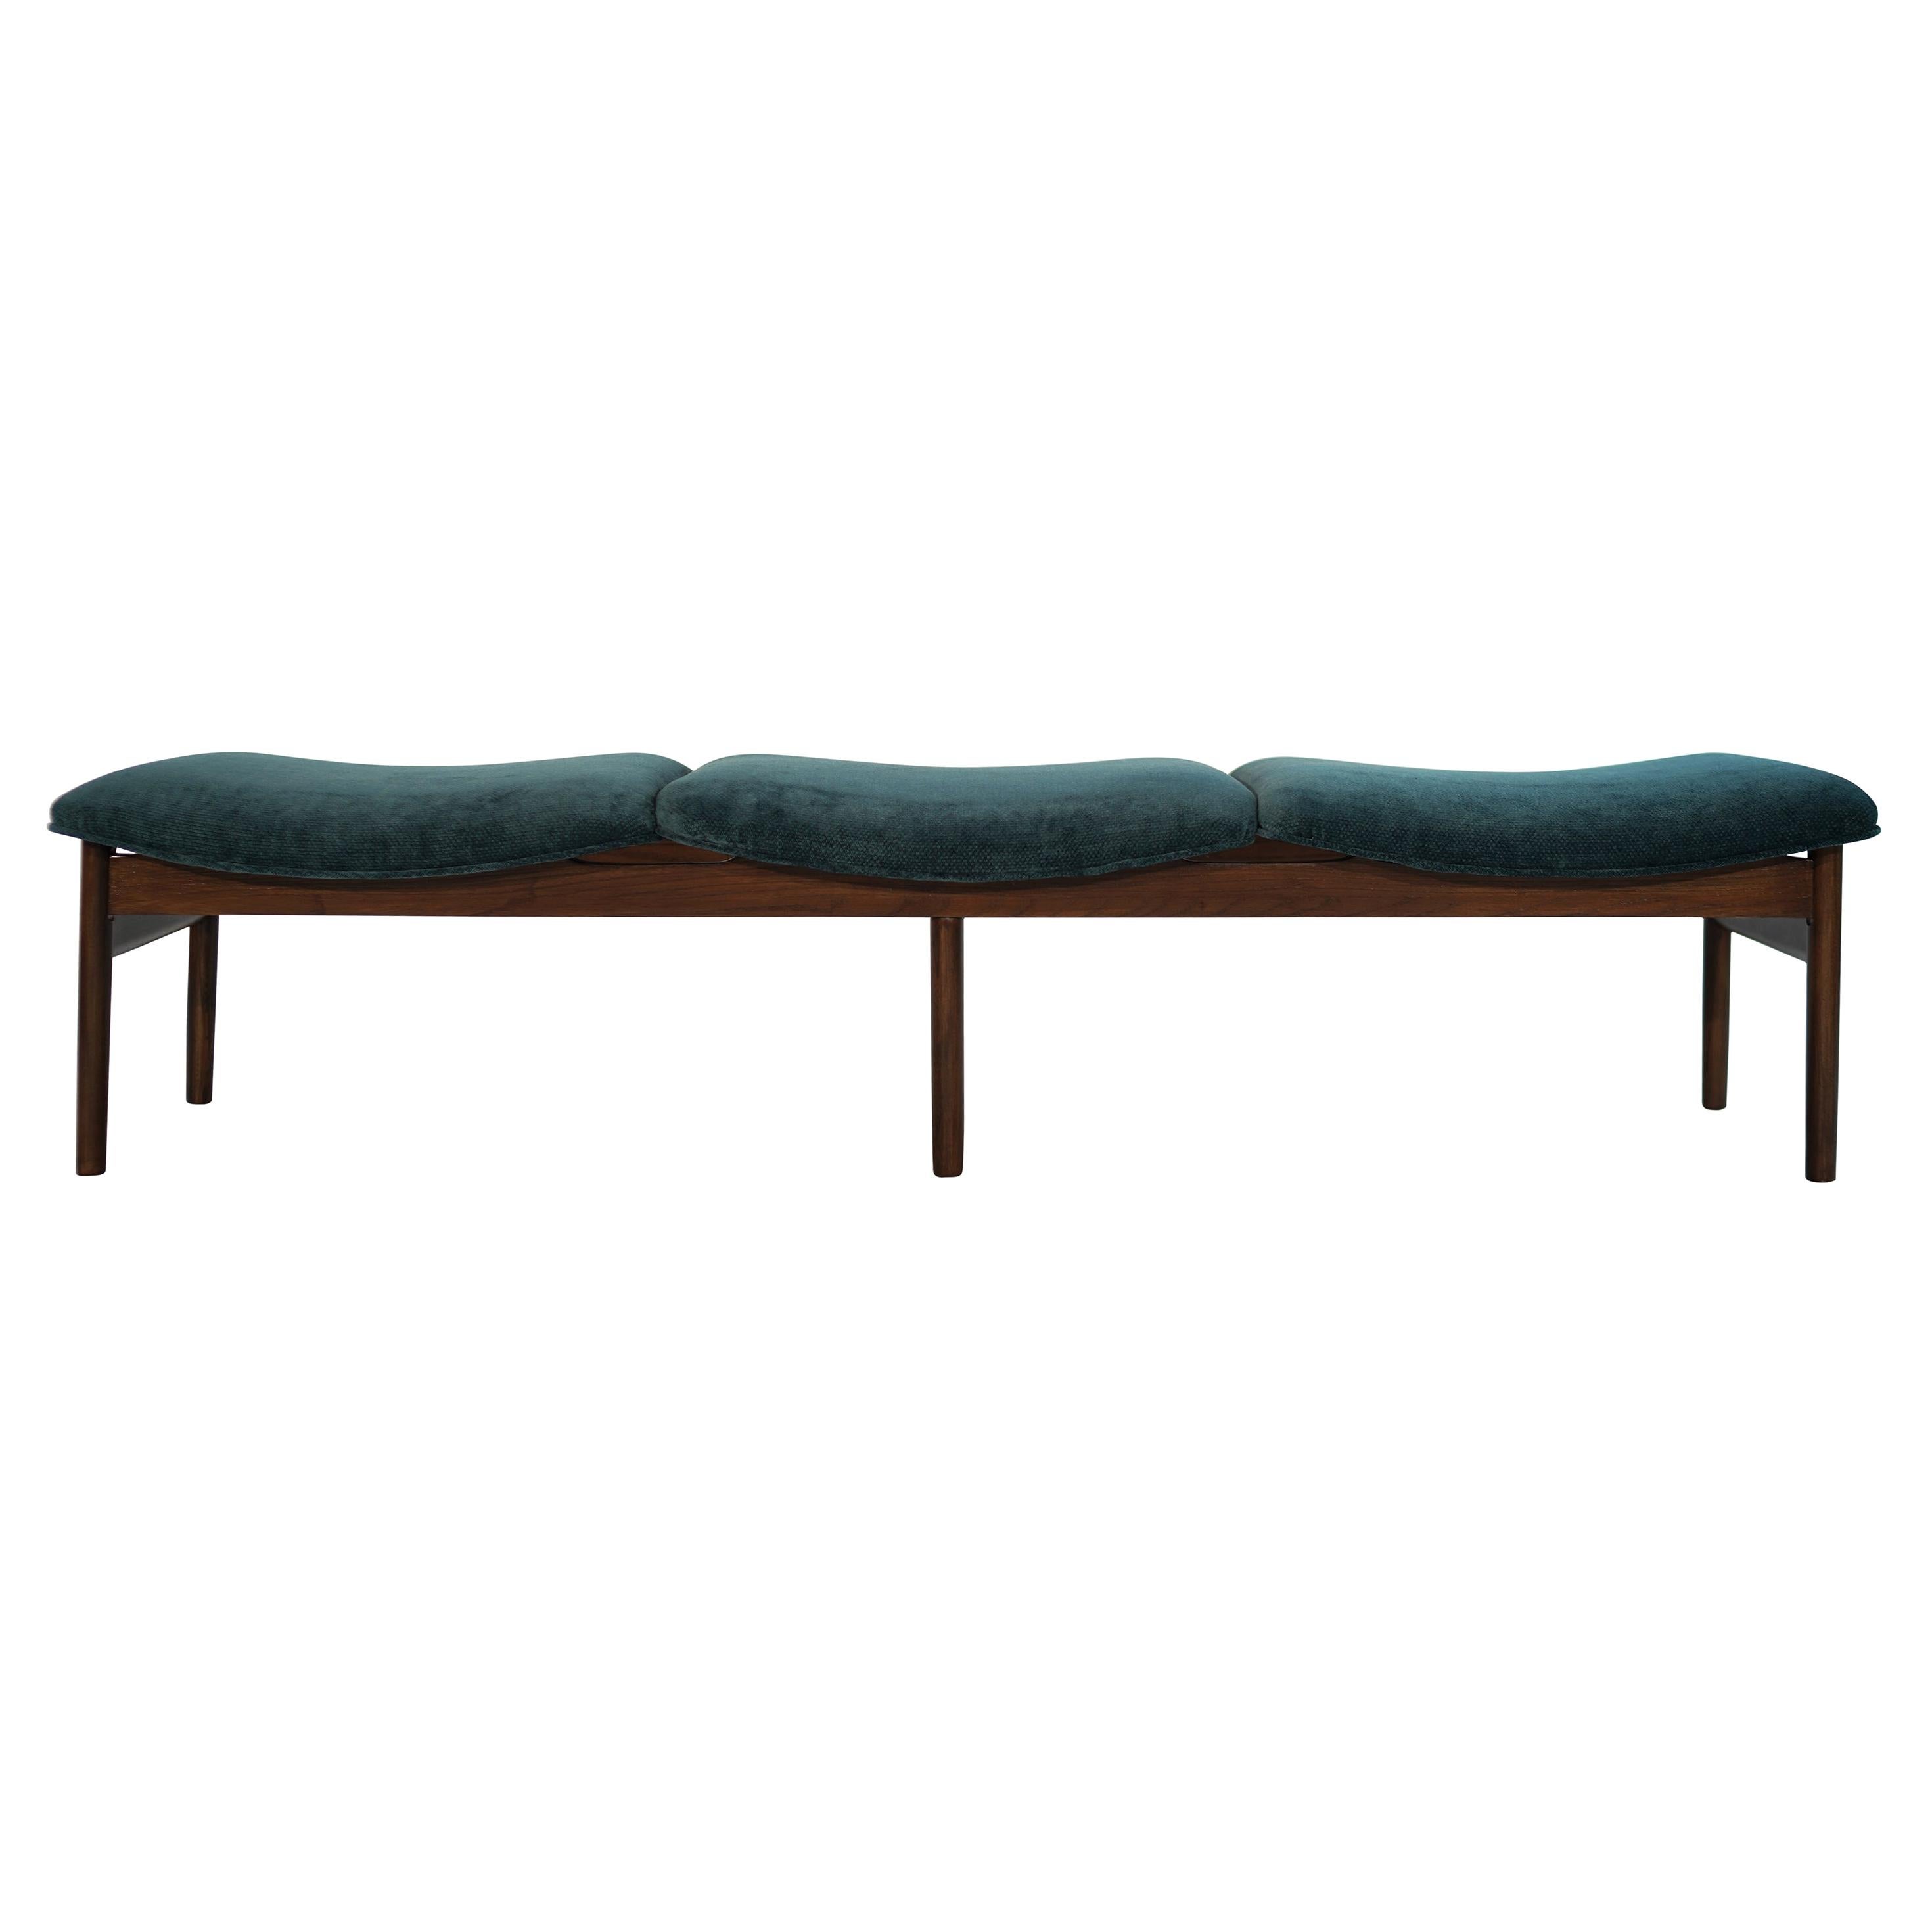 Lawrence Peabody Bench in Teal Twill, 1950s